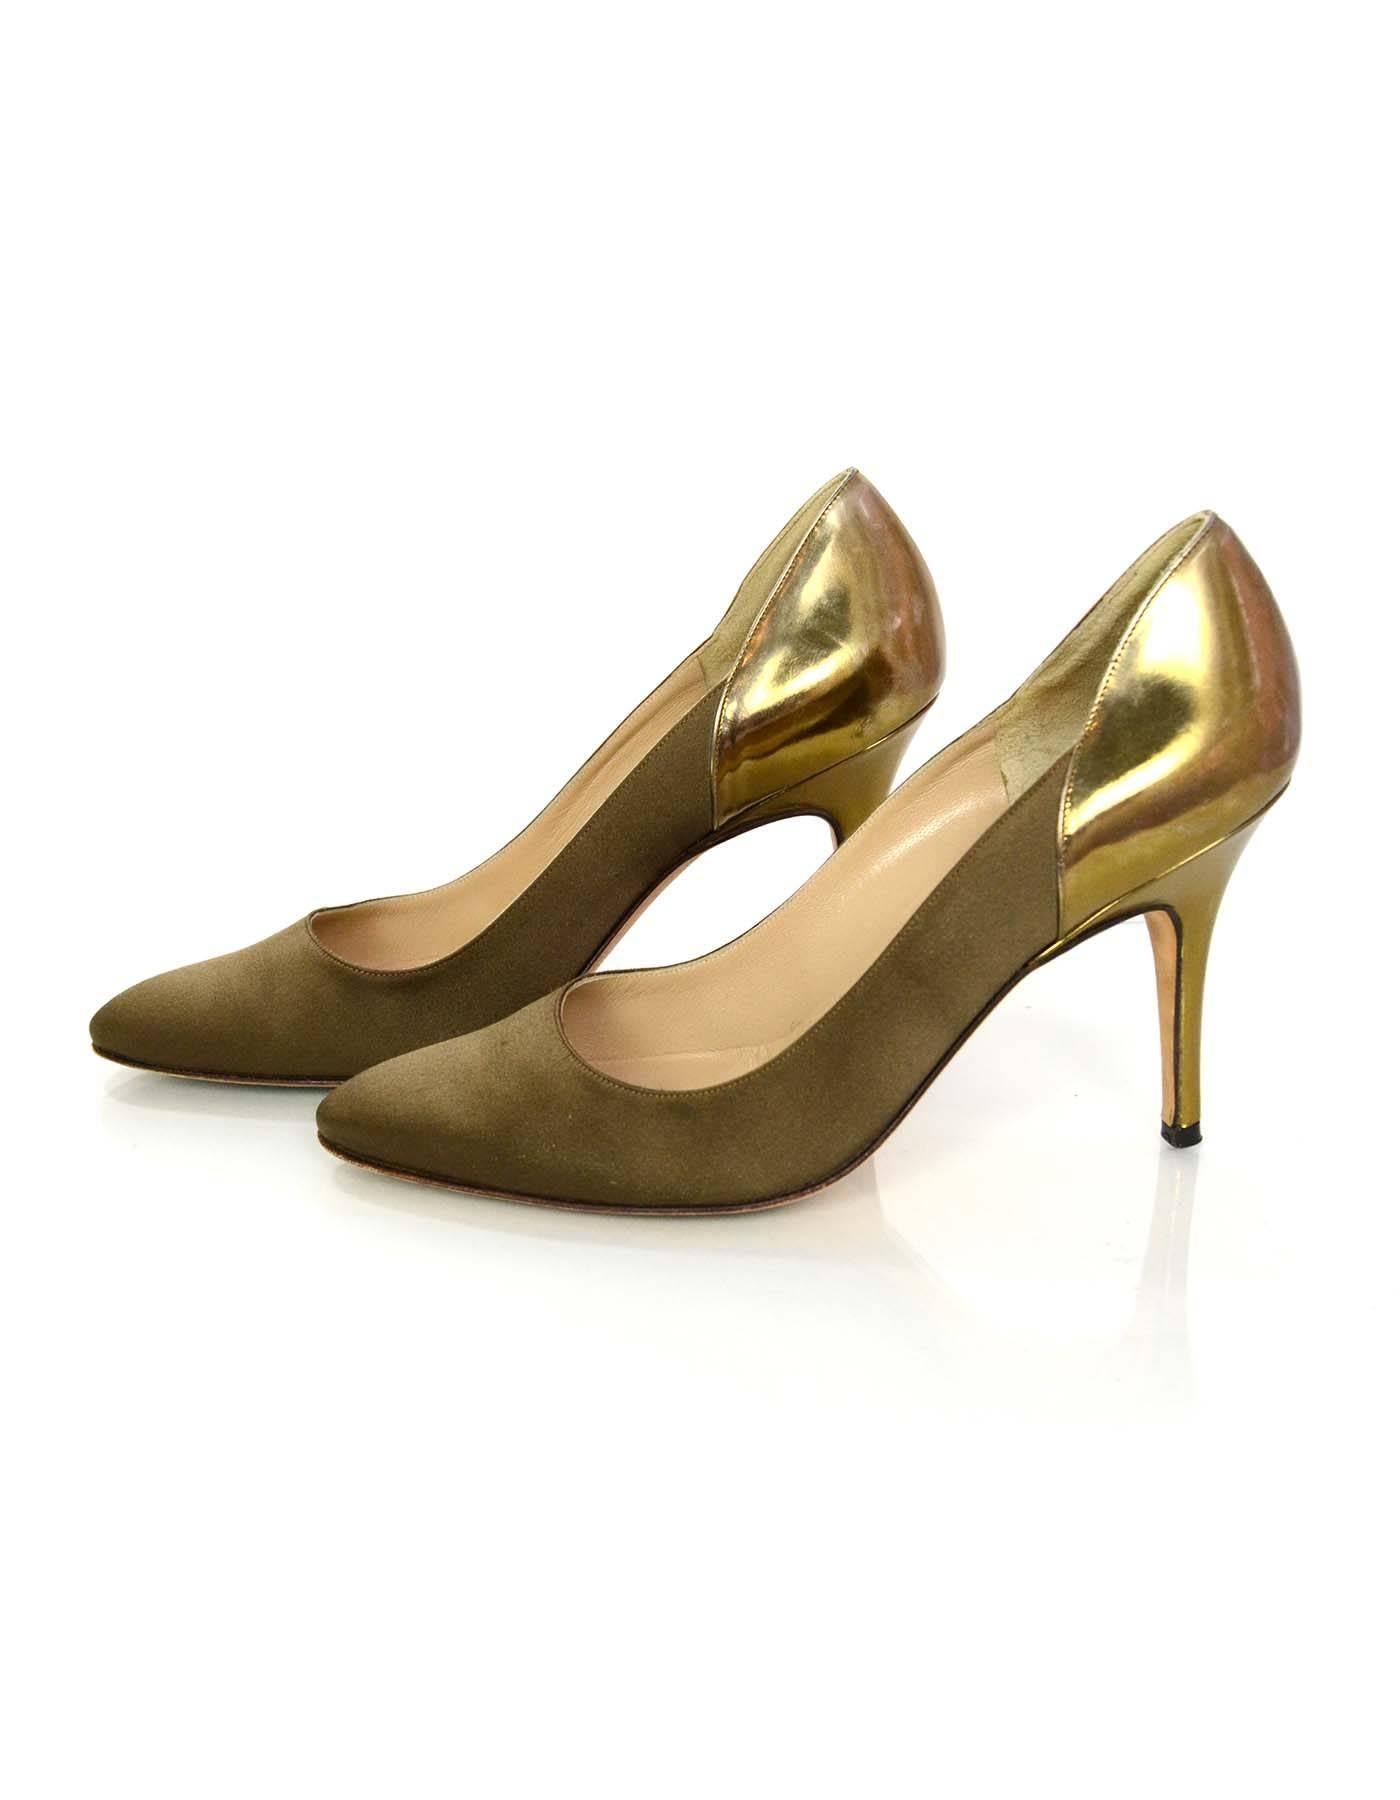 Manolo Blahnik Bronze Satin Pumps Sz 38

Features patent heels

Color: Bronze
Materials: Satin and leather
Closure/Opening: Slide on
Sole Stamp: Manolo Blahnik 38
Overall Condition: Excellent pre-owned condition with the exception of light